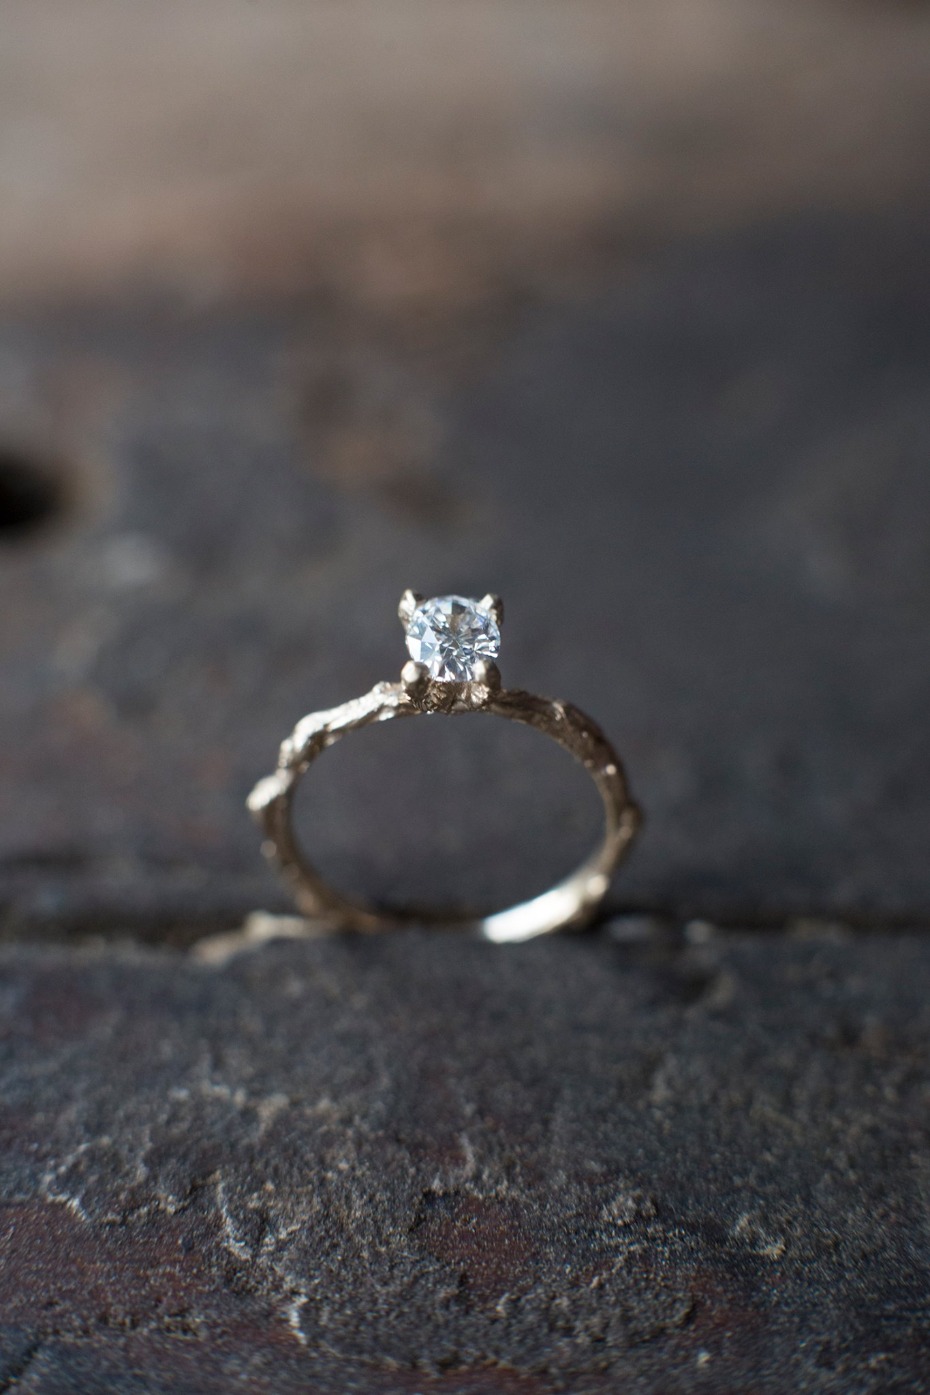 Rhodes Wedding Co. has hand carved diamond rings to celebrate your love